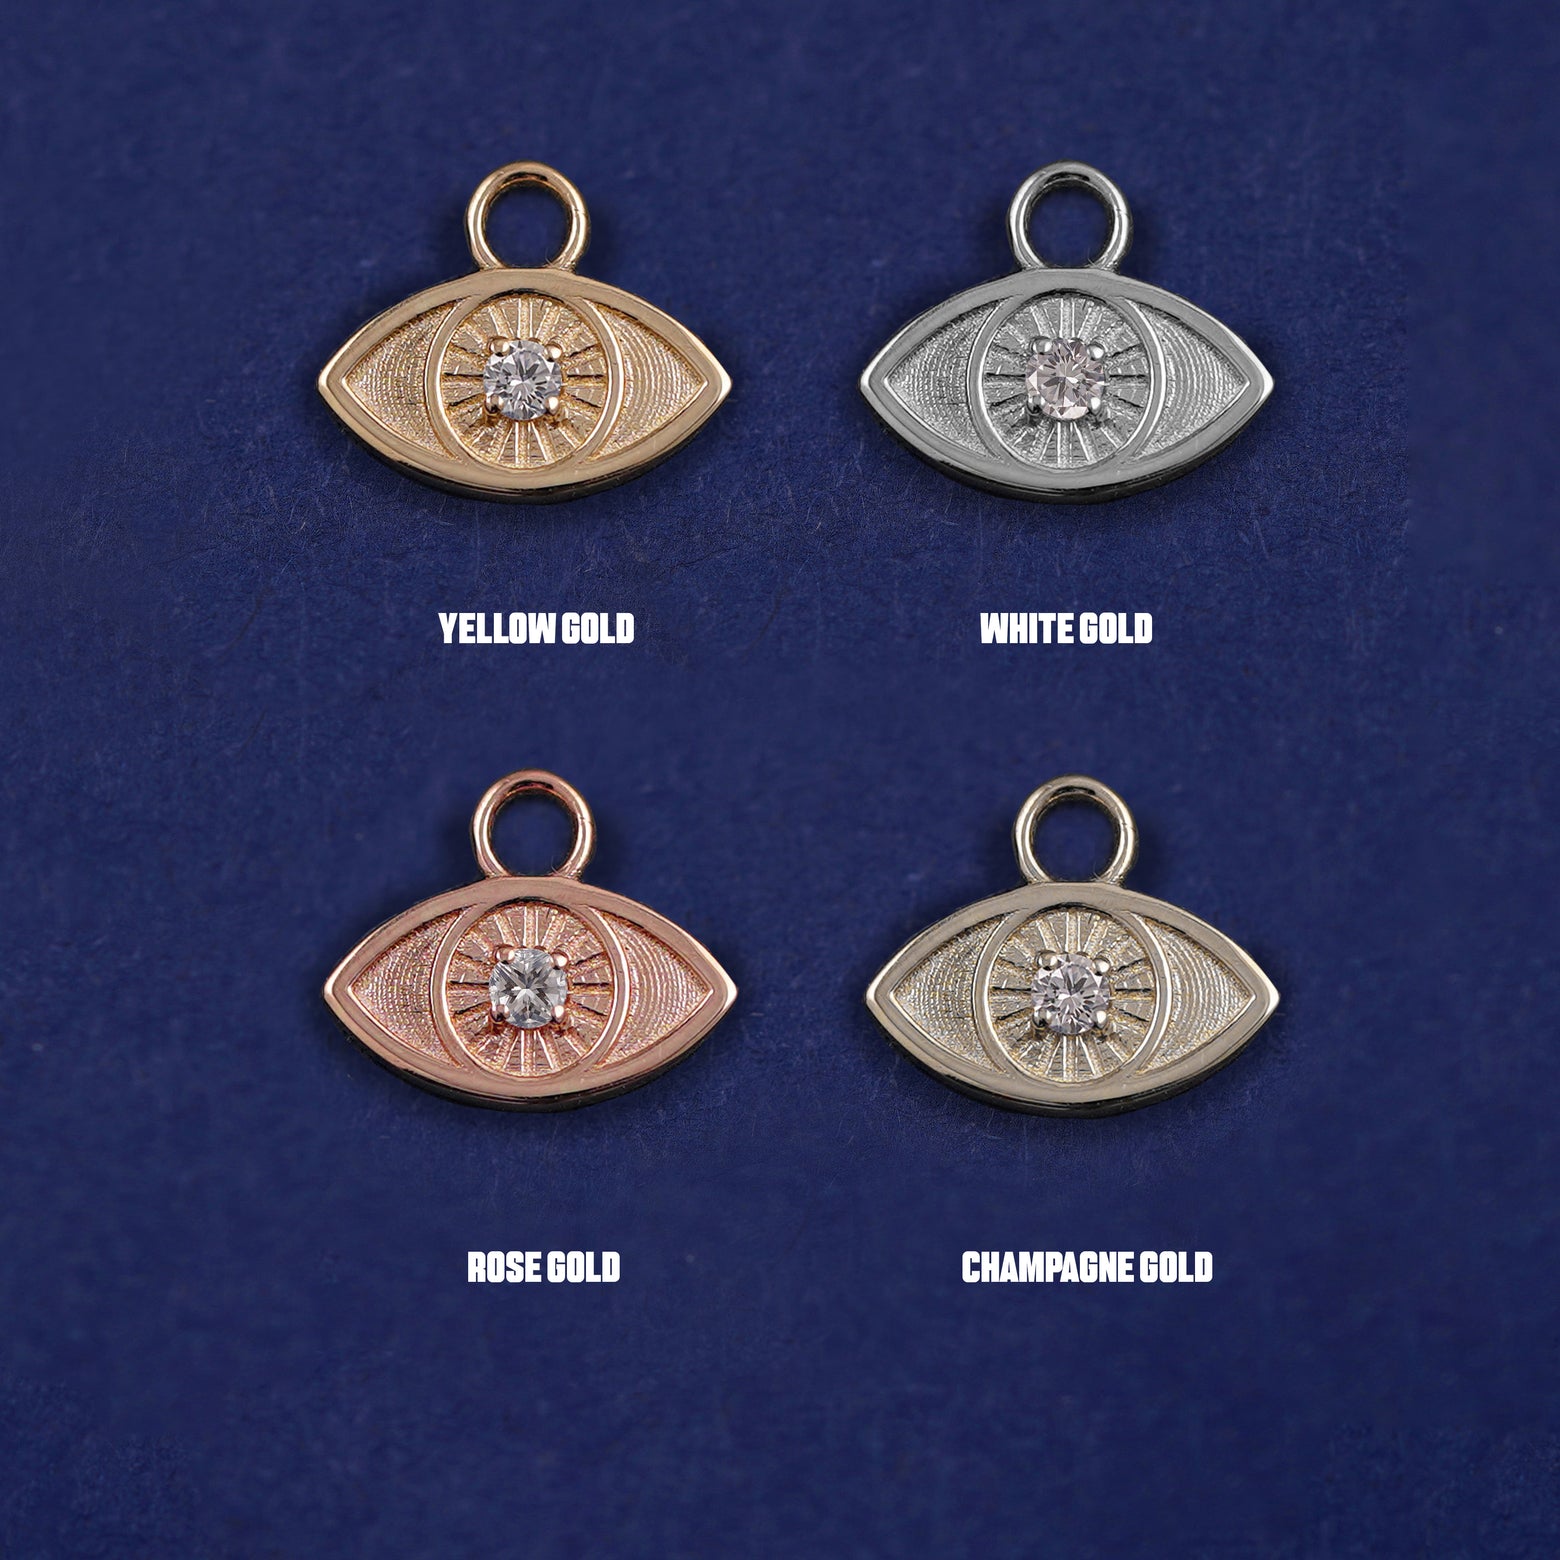 Four versions of the Diamond Evil Eye Charm shown in options of yellow, white, rose and champagne gold